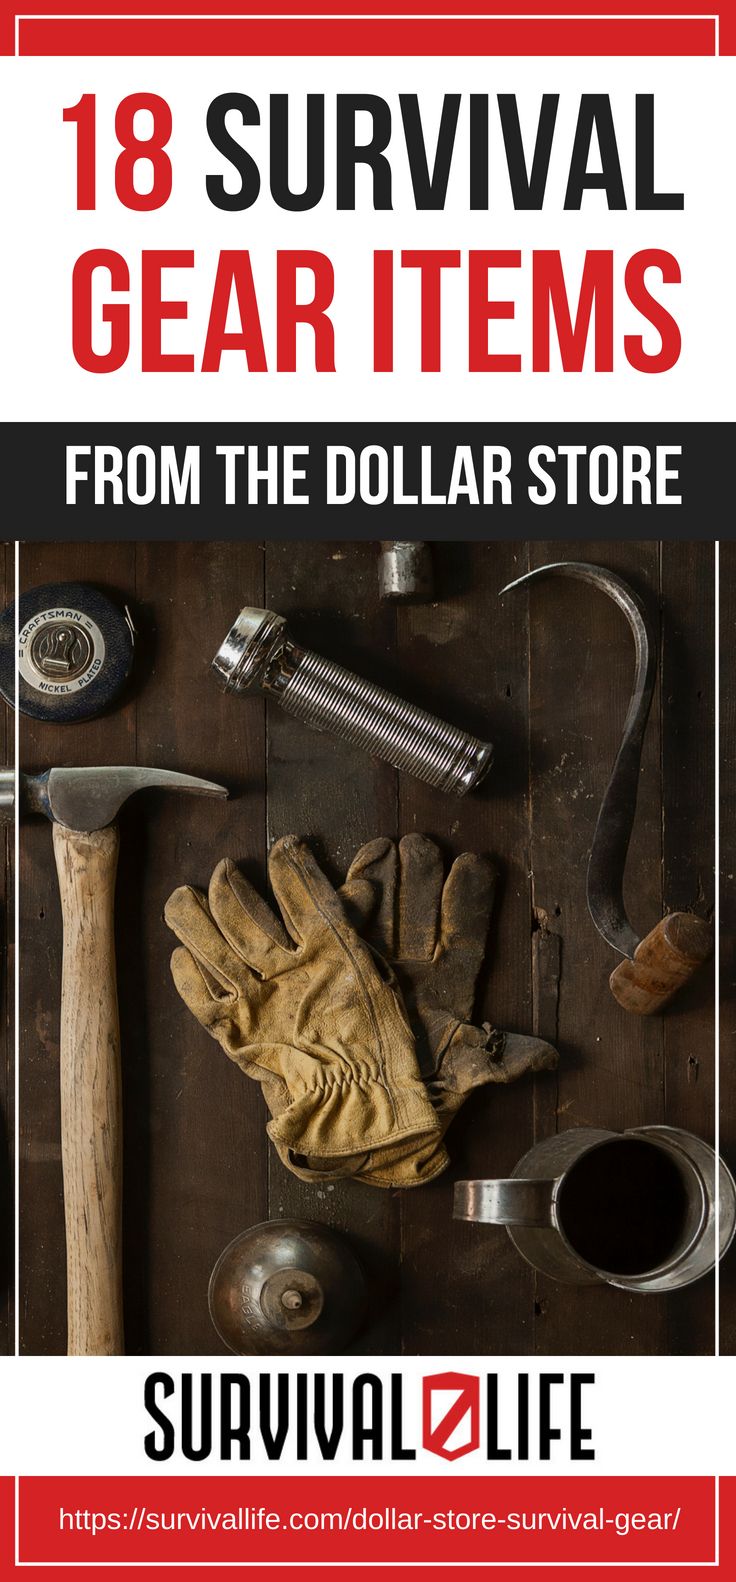 Pinterest Placard | 18 Survival Gear Items From The Dollar Store